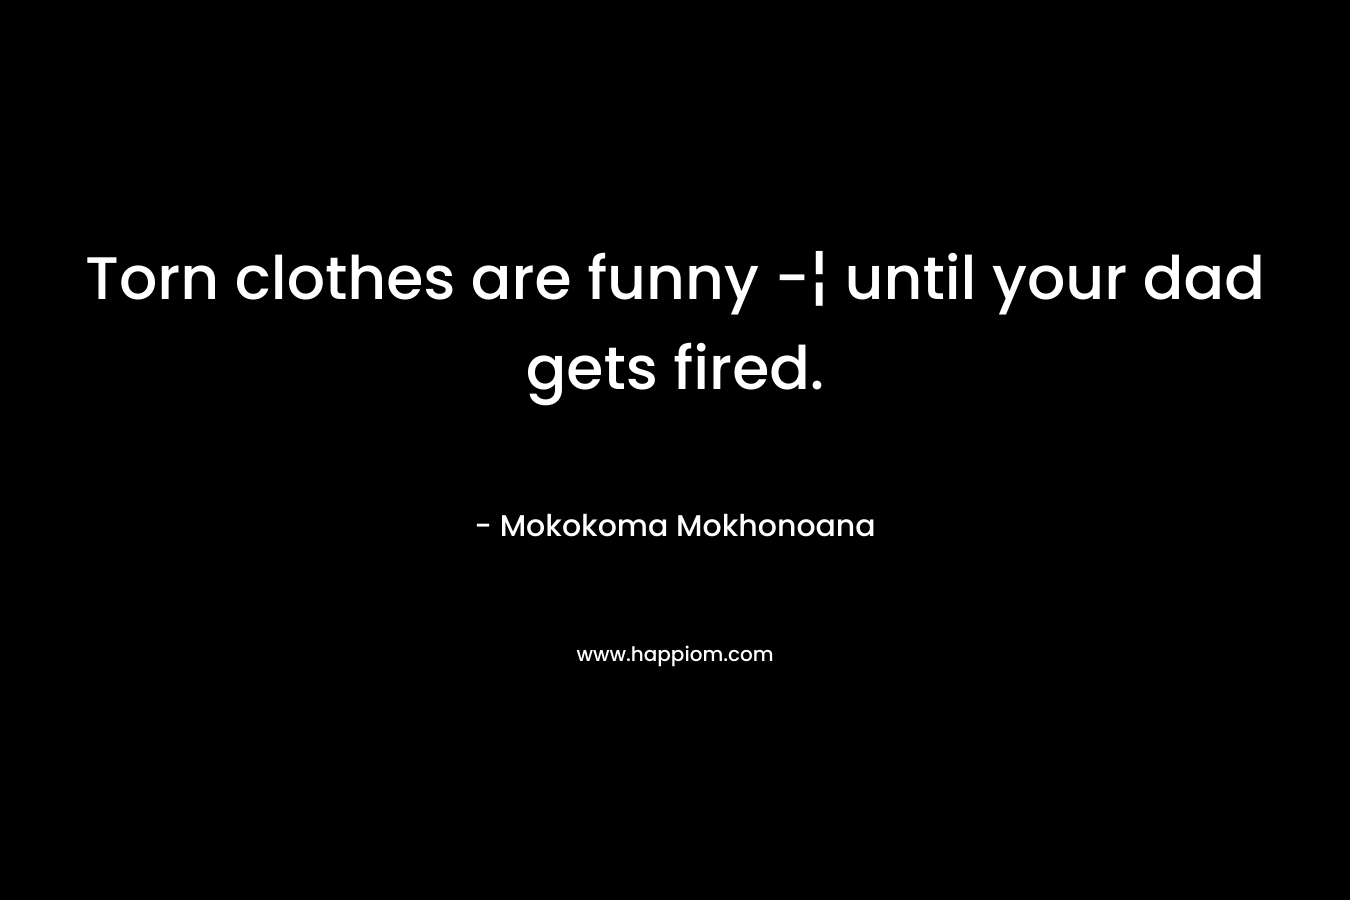 Torn clothes are funny -¦ until your dad gets fired. – Mokokoma Mokhonoana